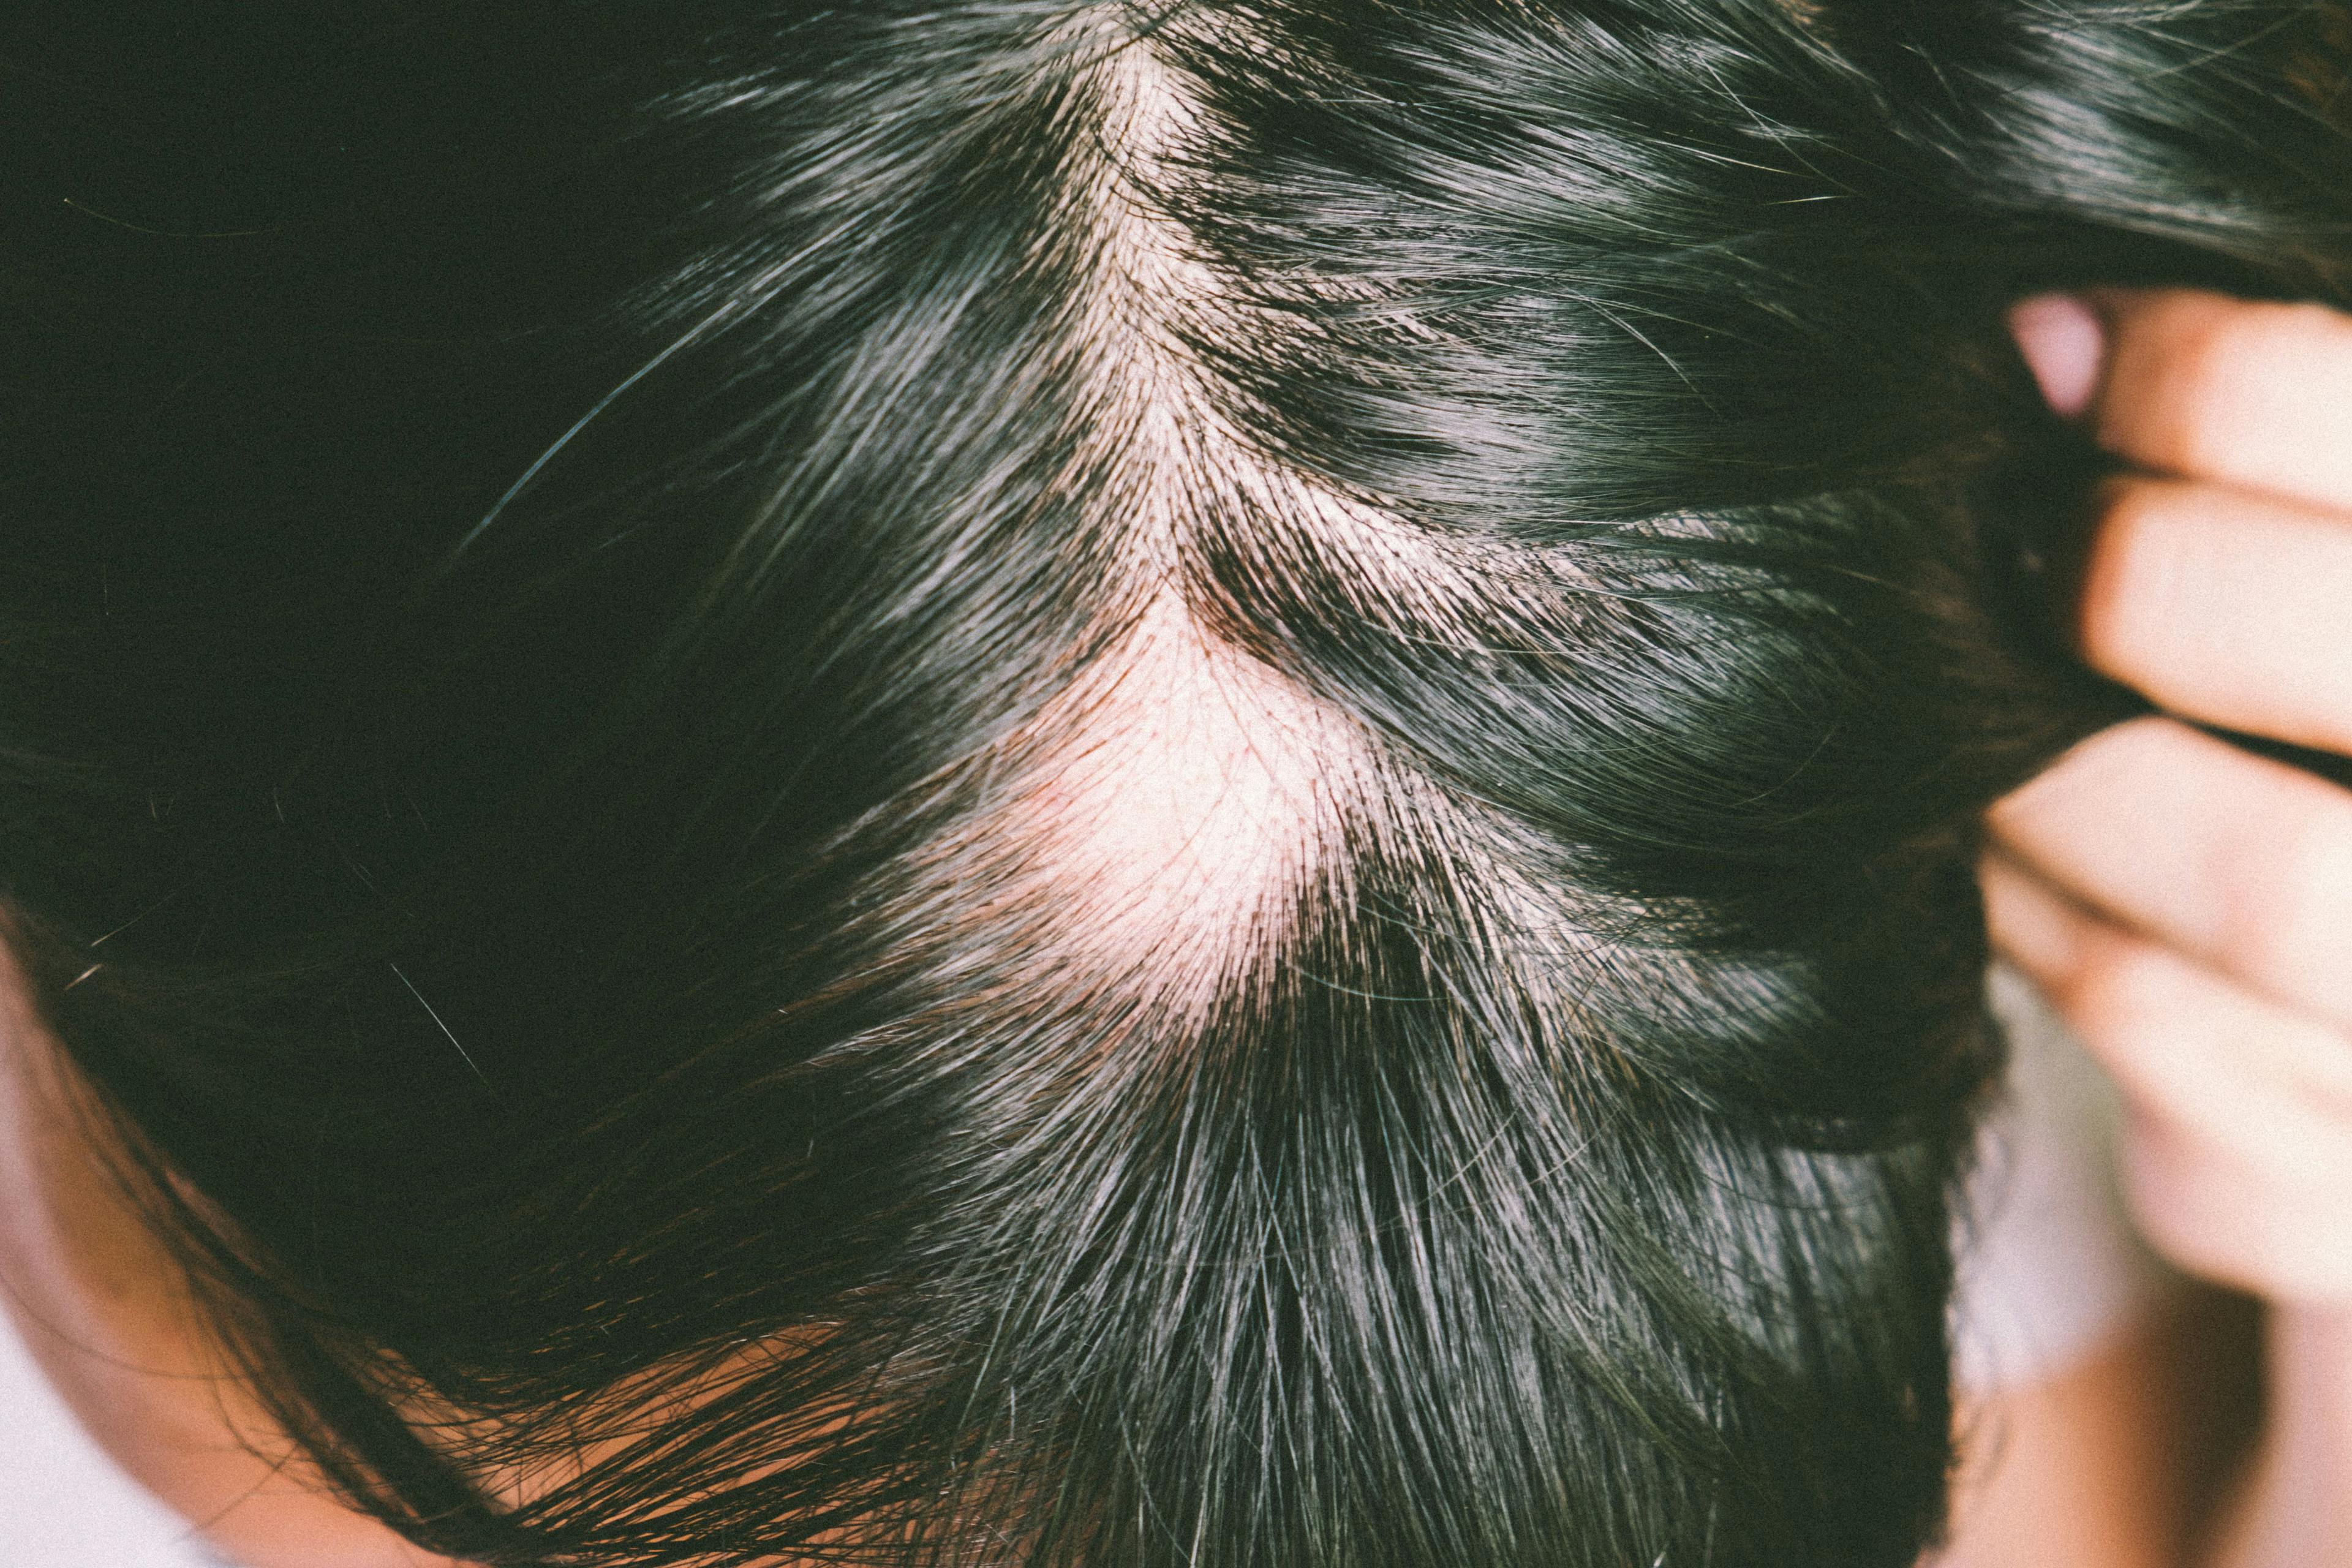 JAK Inhibitors Demonstrate Safe, Effective Hair Growth in Patients With Alopecia Areata